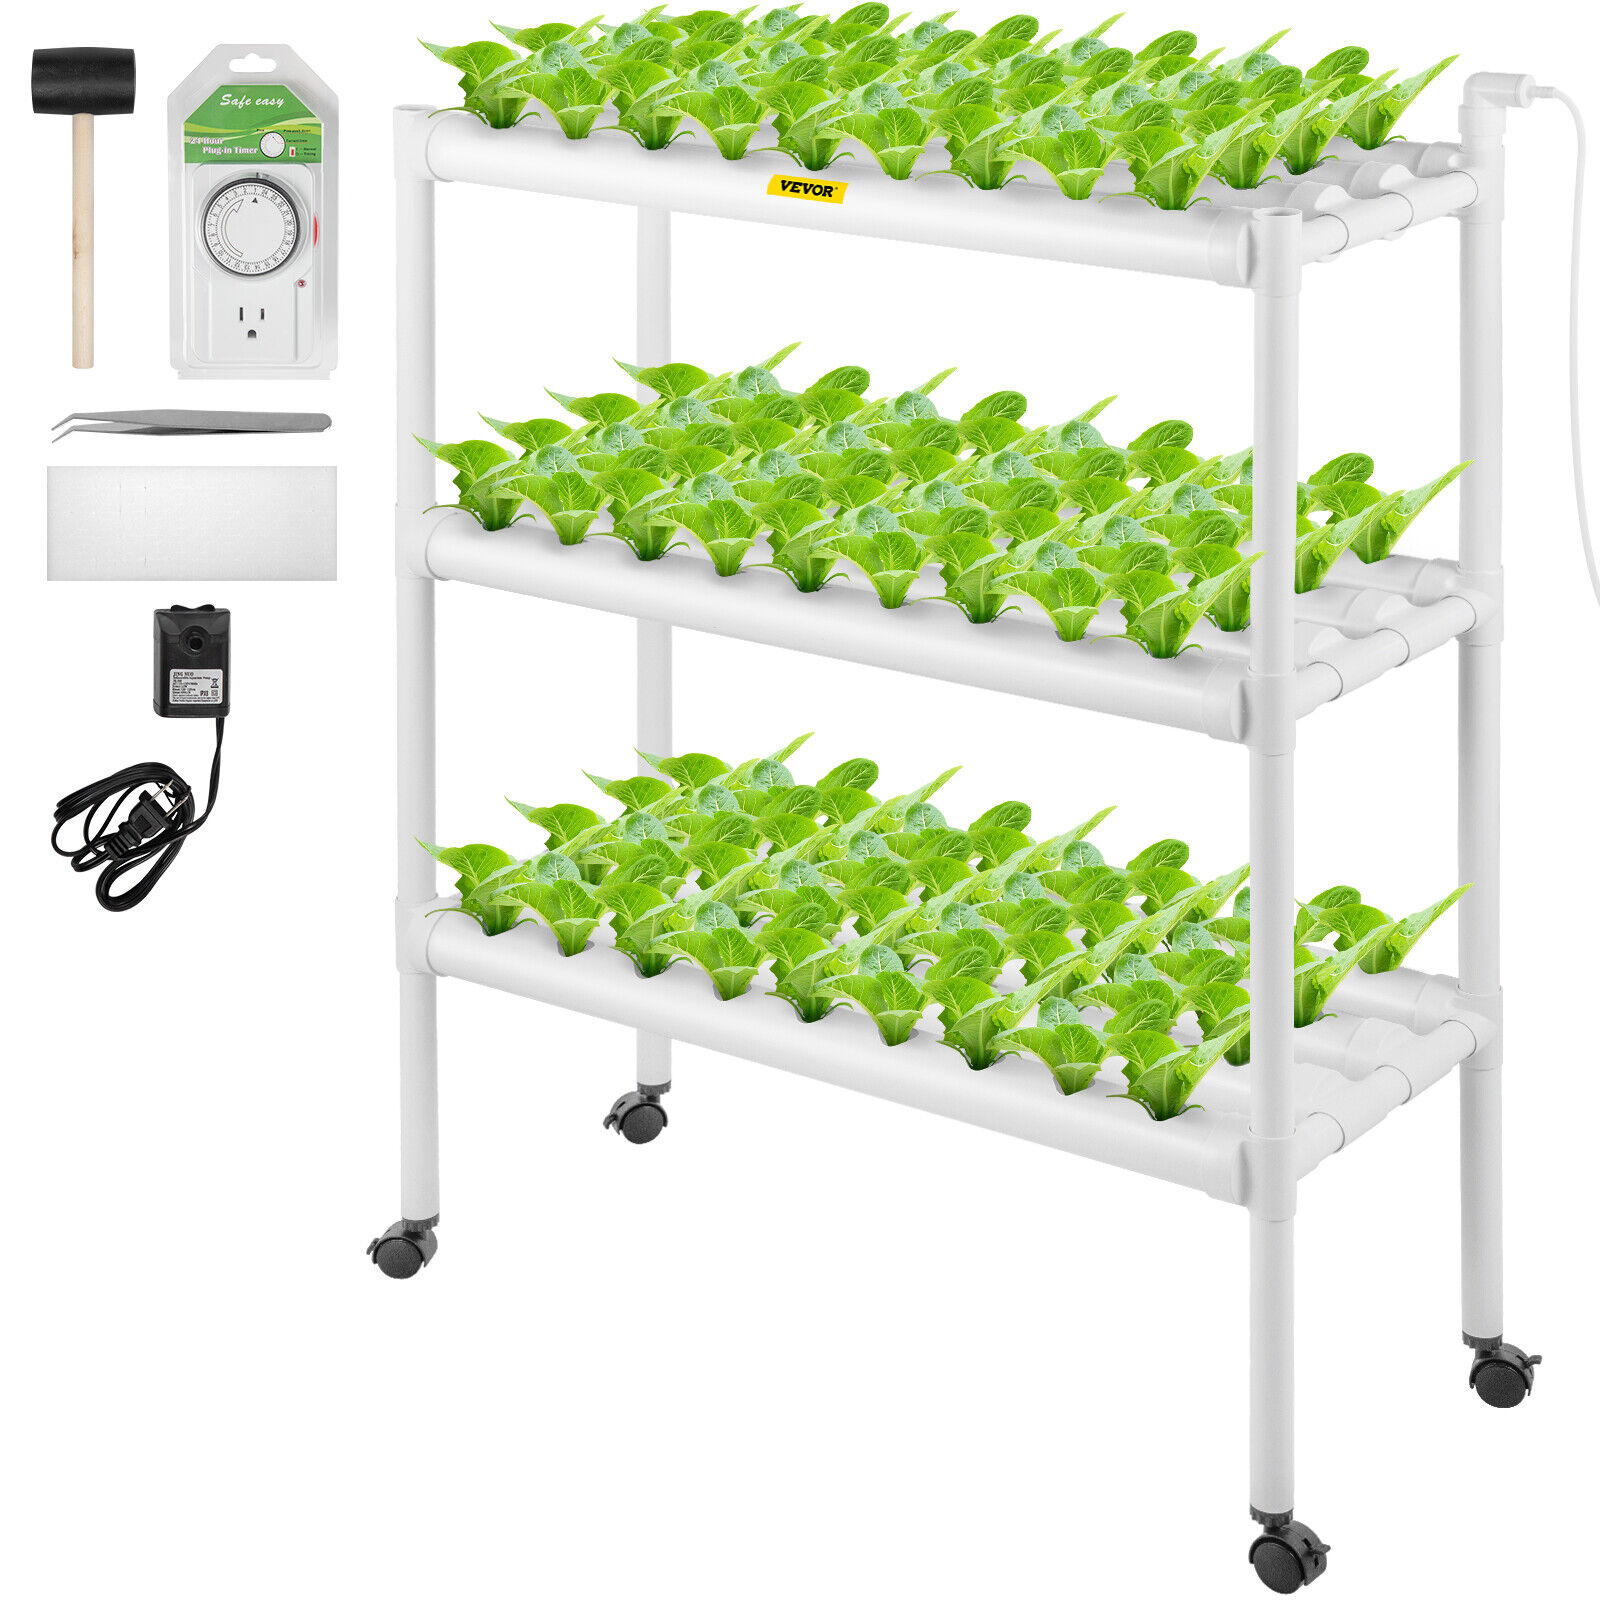 VEVOR Hydroponic Grow Kit Hydroponics System 108 Plant Sites 3 Layers 12 Pipes